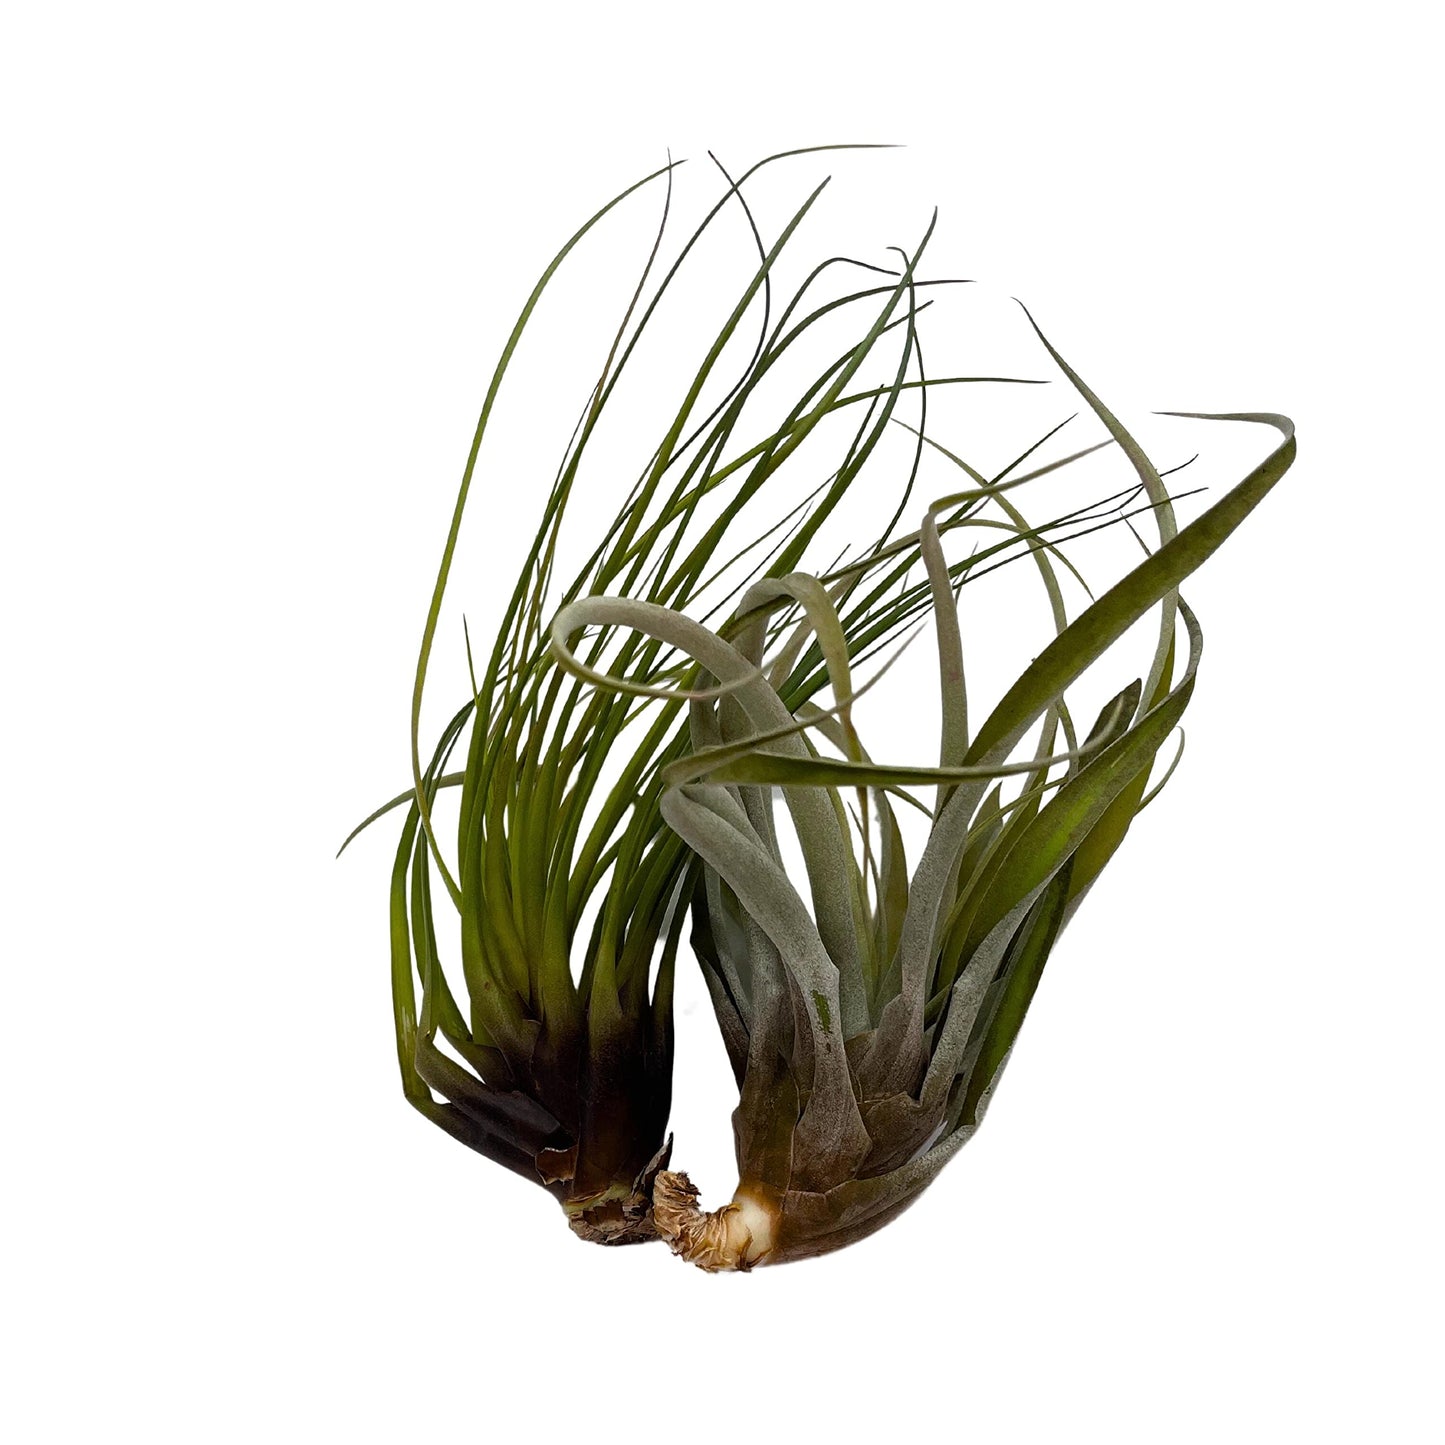 Large Tillandisa Assorment, Set of 2 Large-Sized Bare-Root airplants Ready to Mount and Grow